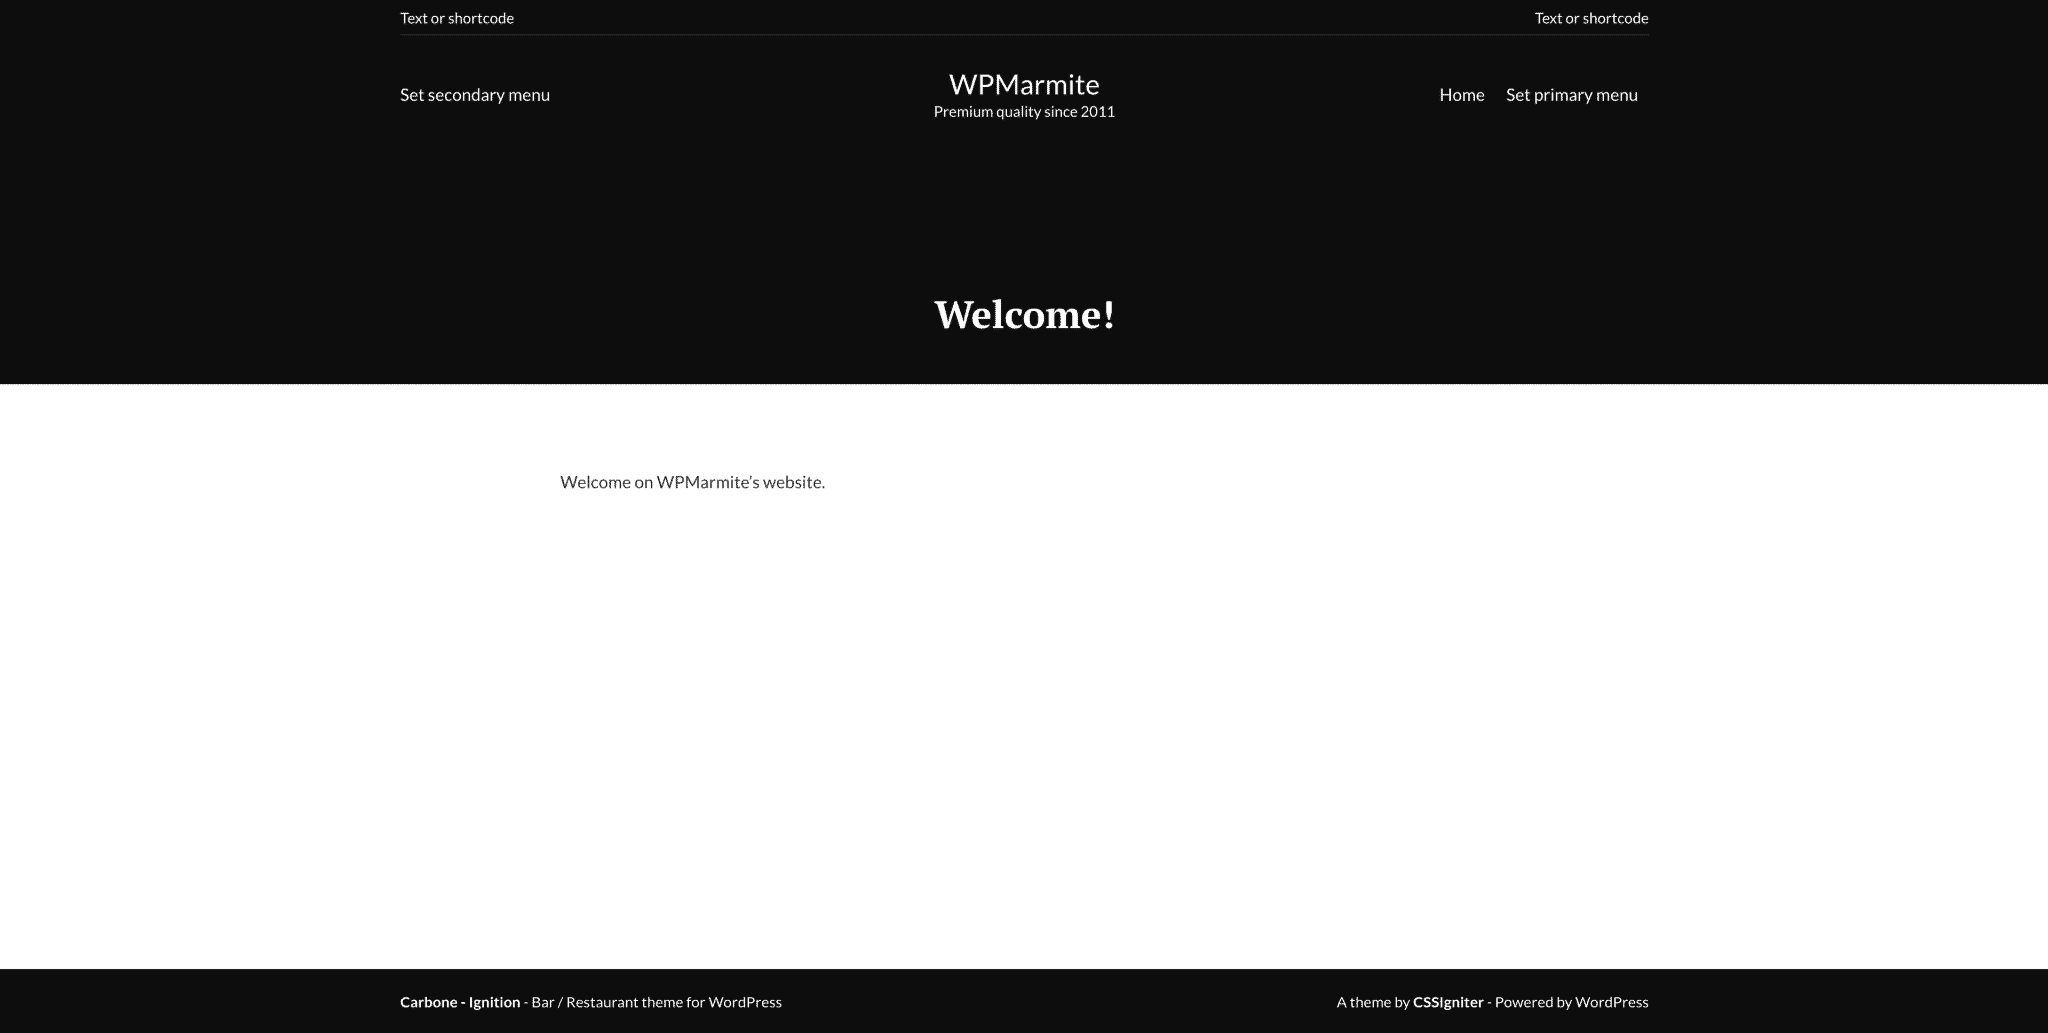 Welcome page of a site made with the Carbone theme without importing the demo.